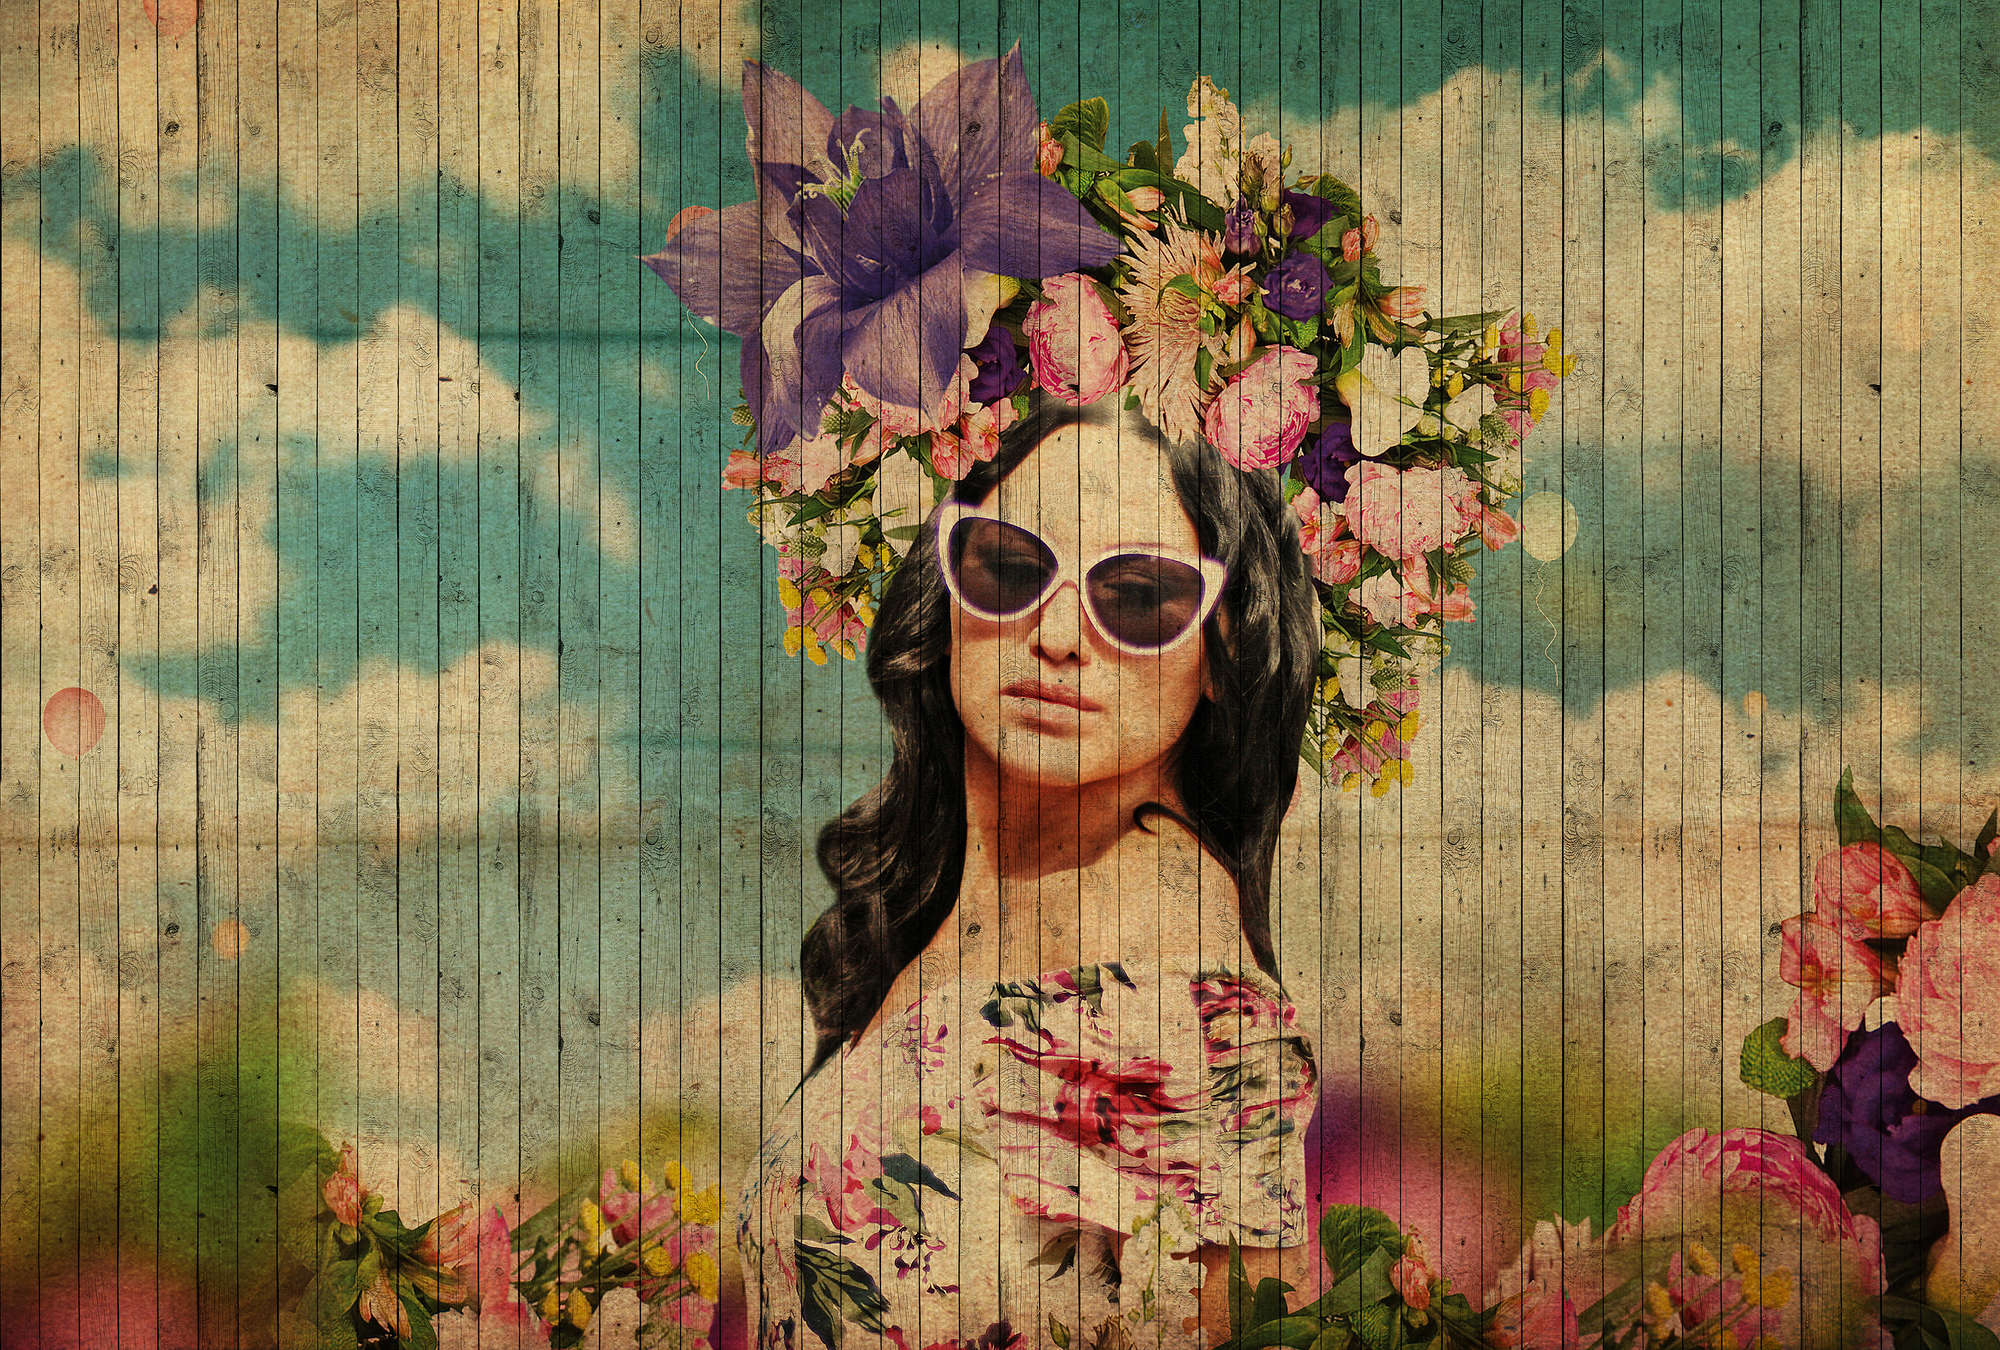             Havana 1 - Young woman in the flower meadow photo wallpaper with wood panel structure - Beige, Blue | Premium smooth non-woven
        